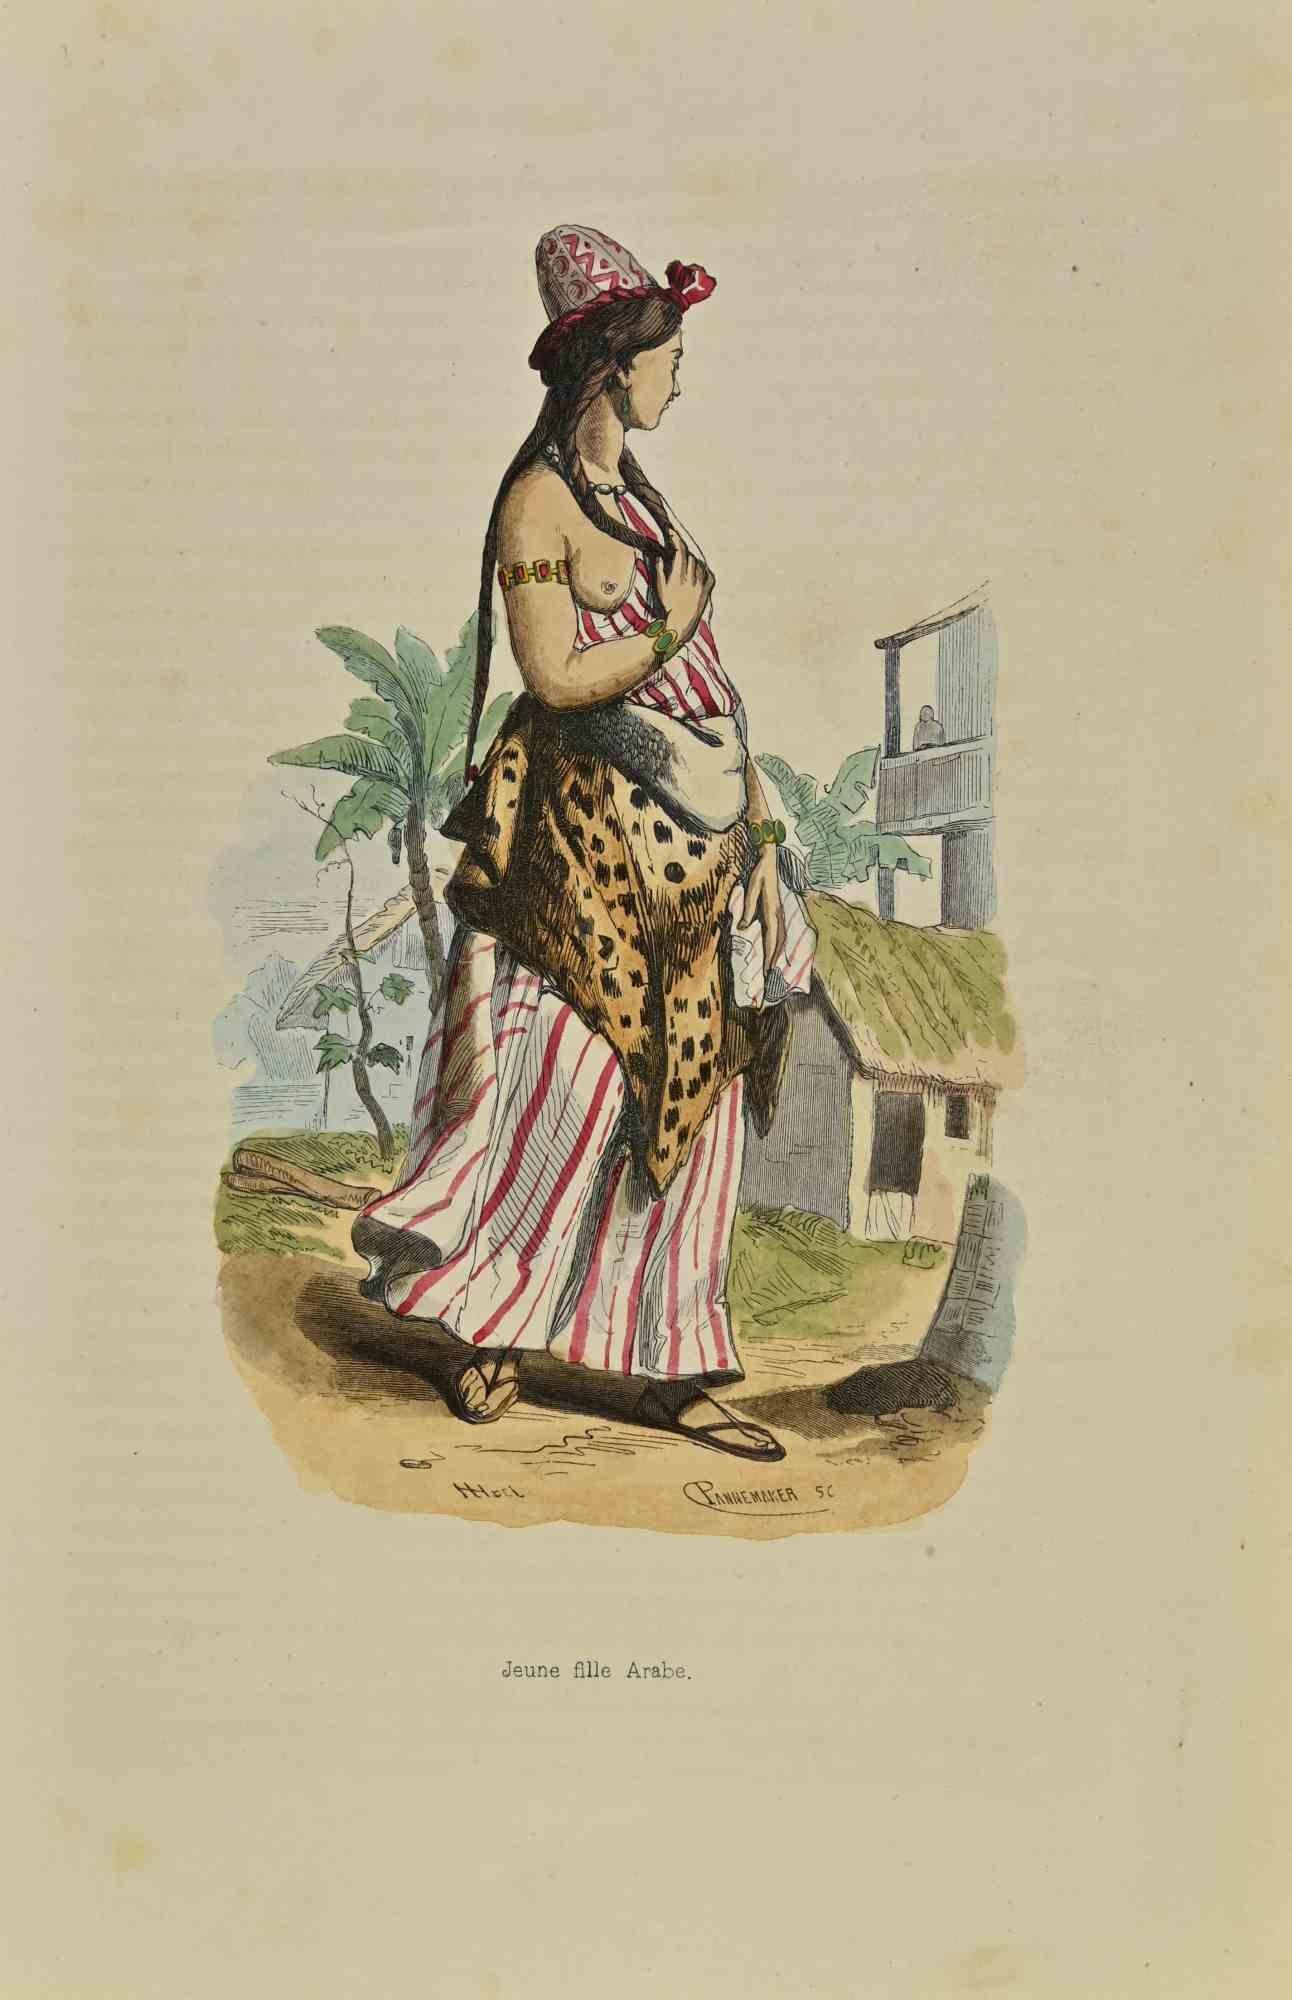 Arabic Girl is a lithograph made by Auguste Wahlen in 1844.

Hand colored.

Good condition.

At the center of the artwork is the original title "Jeune Fille Arabe".

The work is part of Suite Moeurs, usages et costumes de tous les peuples du monde,